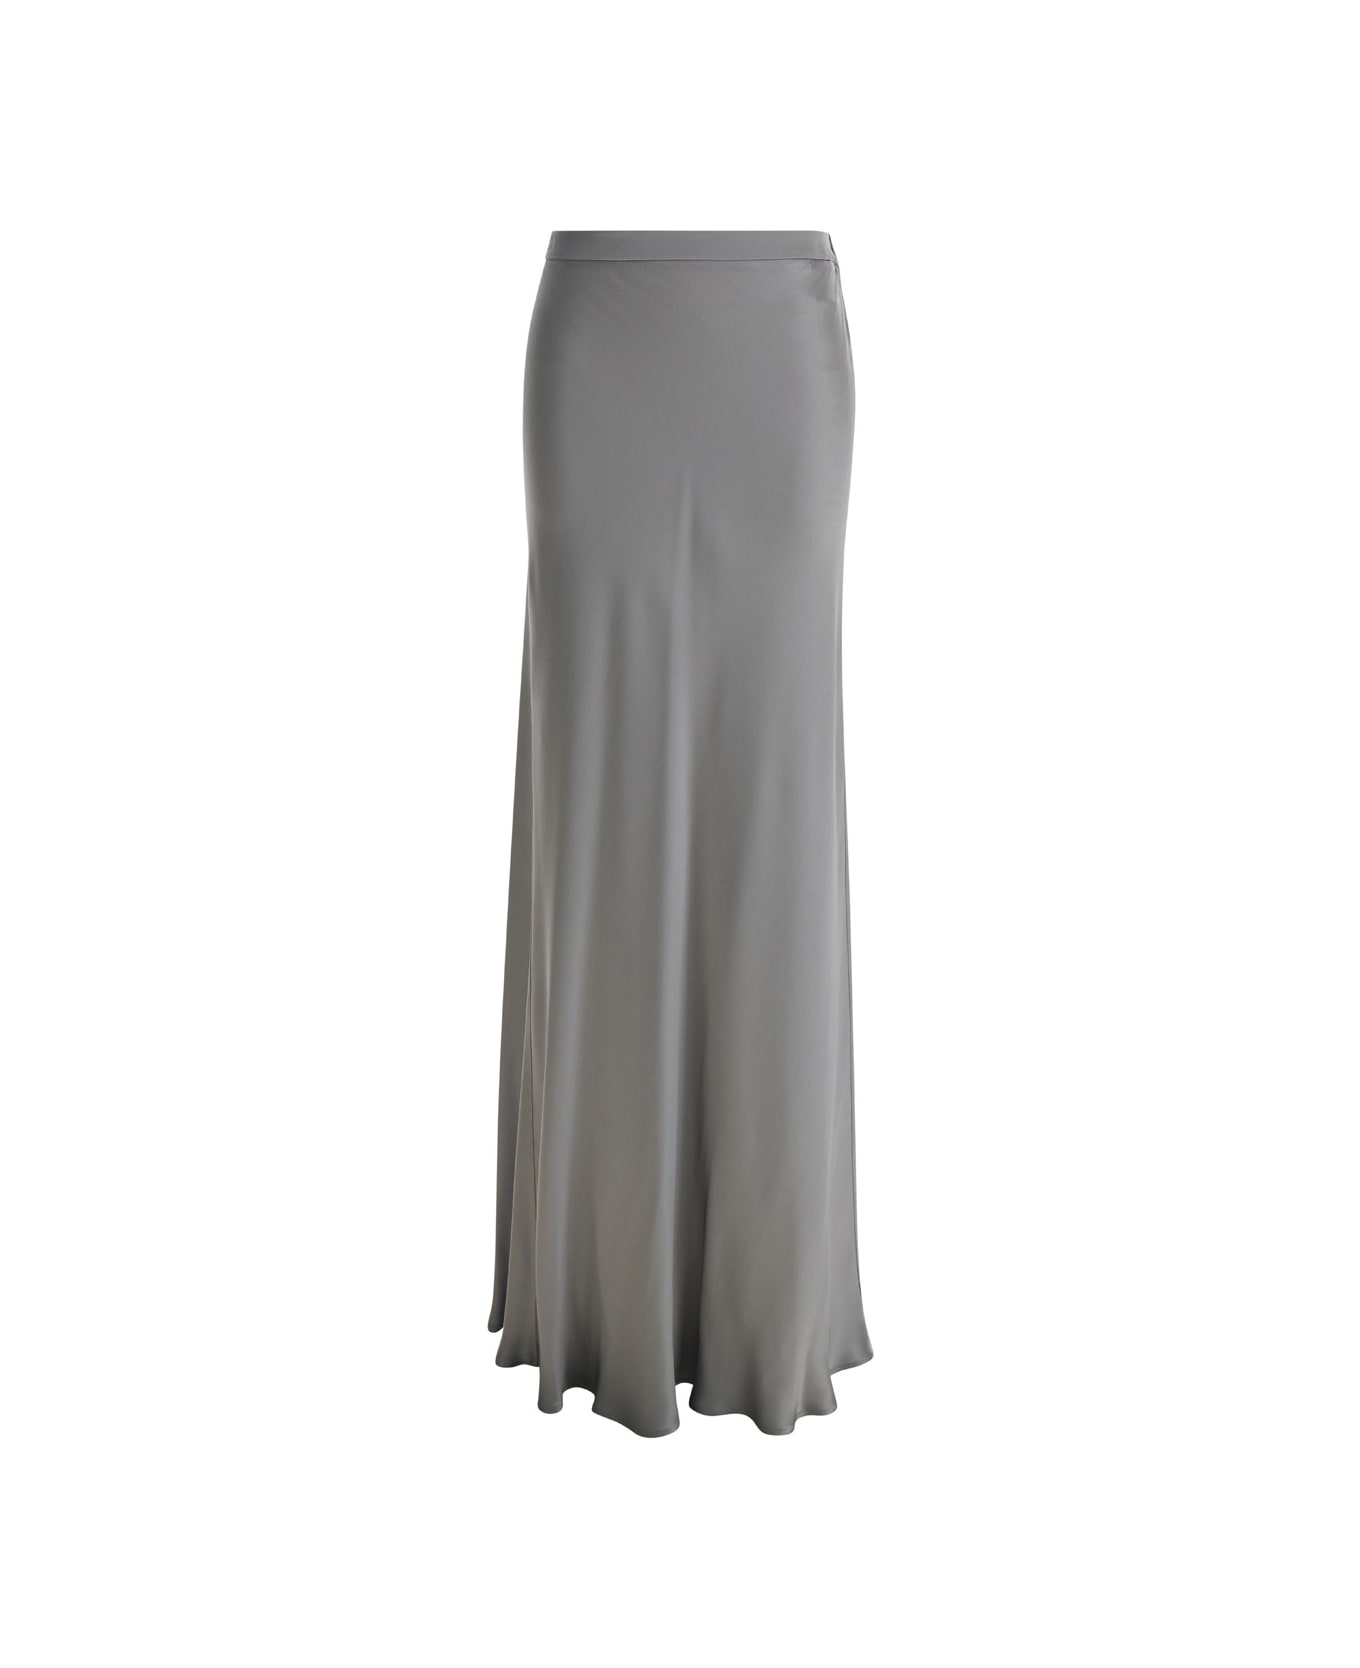 Antonelli Maxi Grey Skirt With Split At The Back In Acetate Blend Woman - Grey スカート